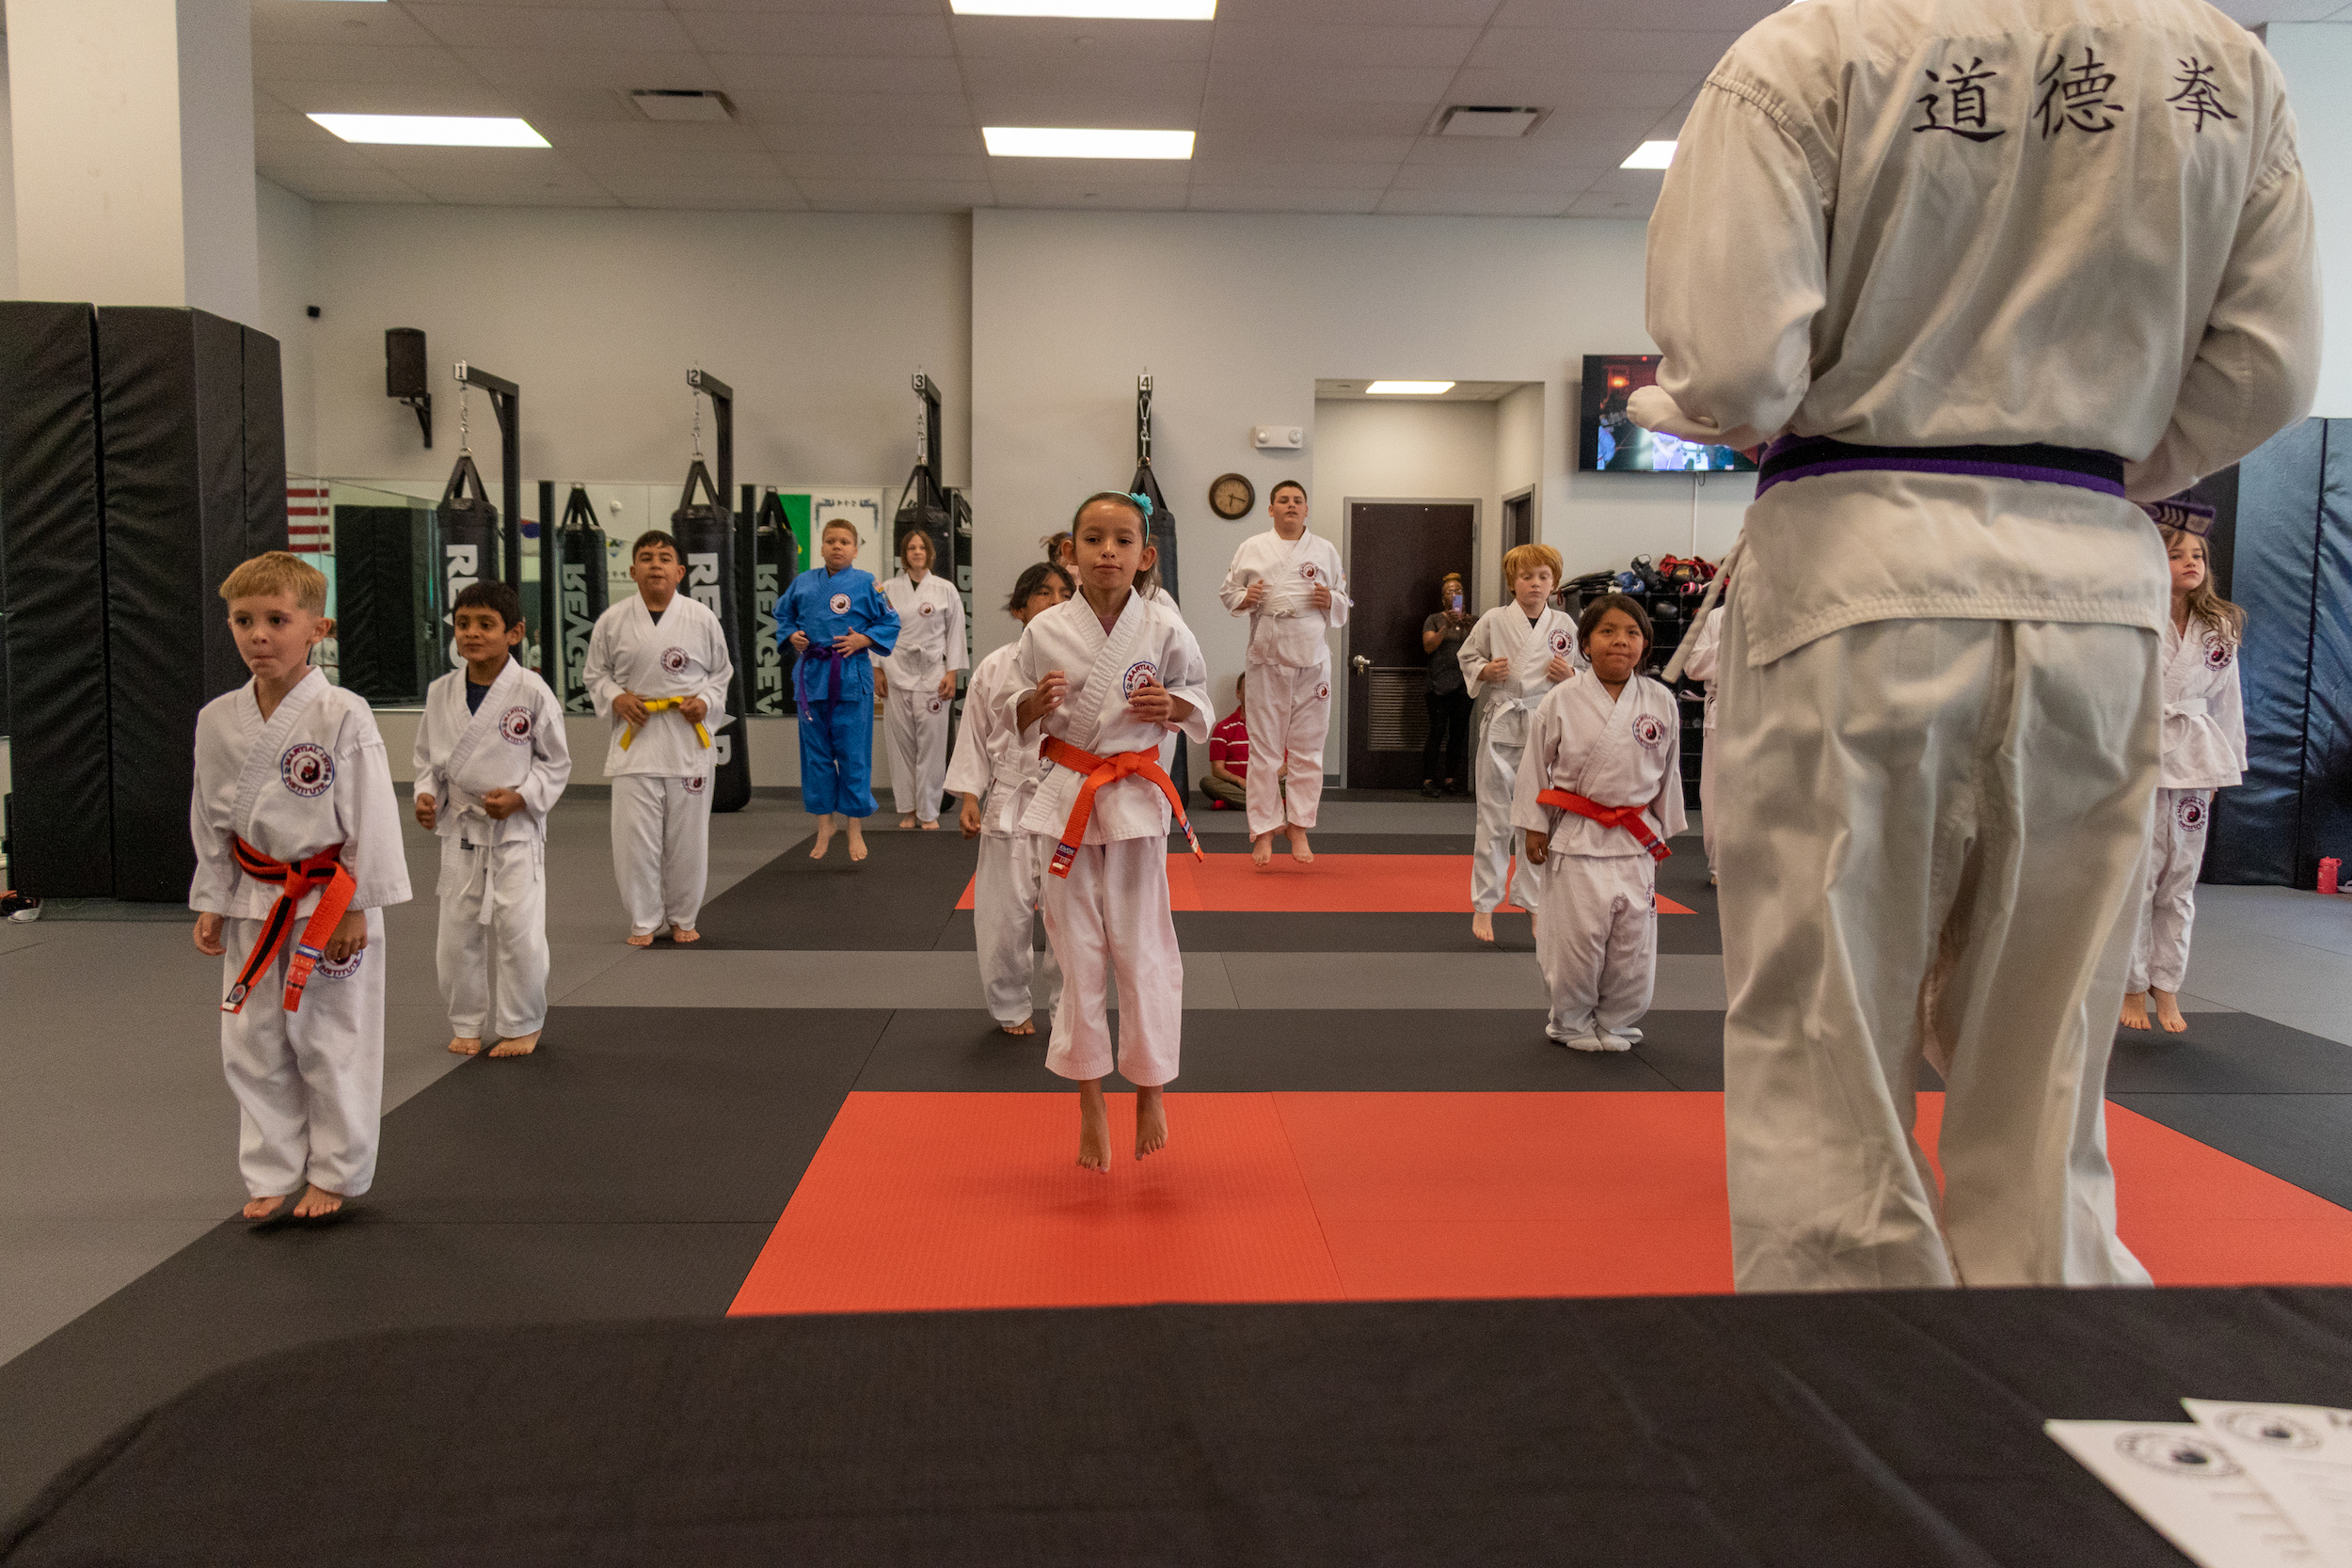 Martial Arts Institute and Fitness Programs